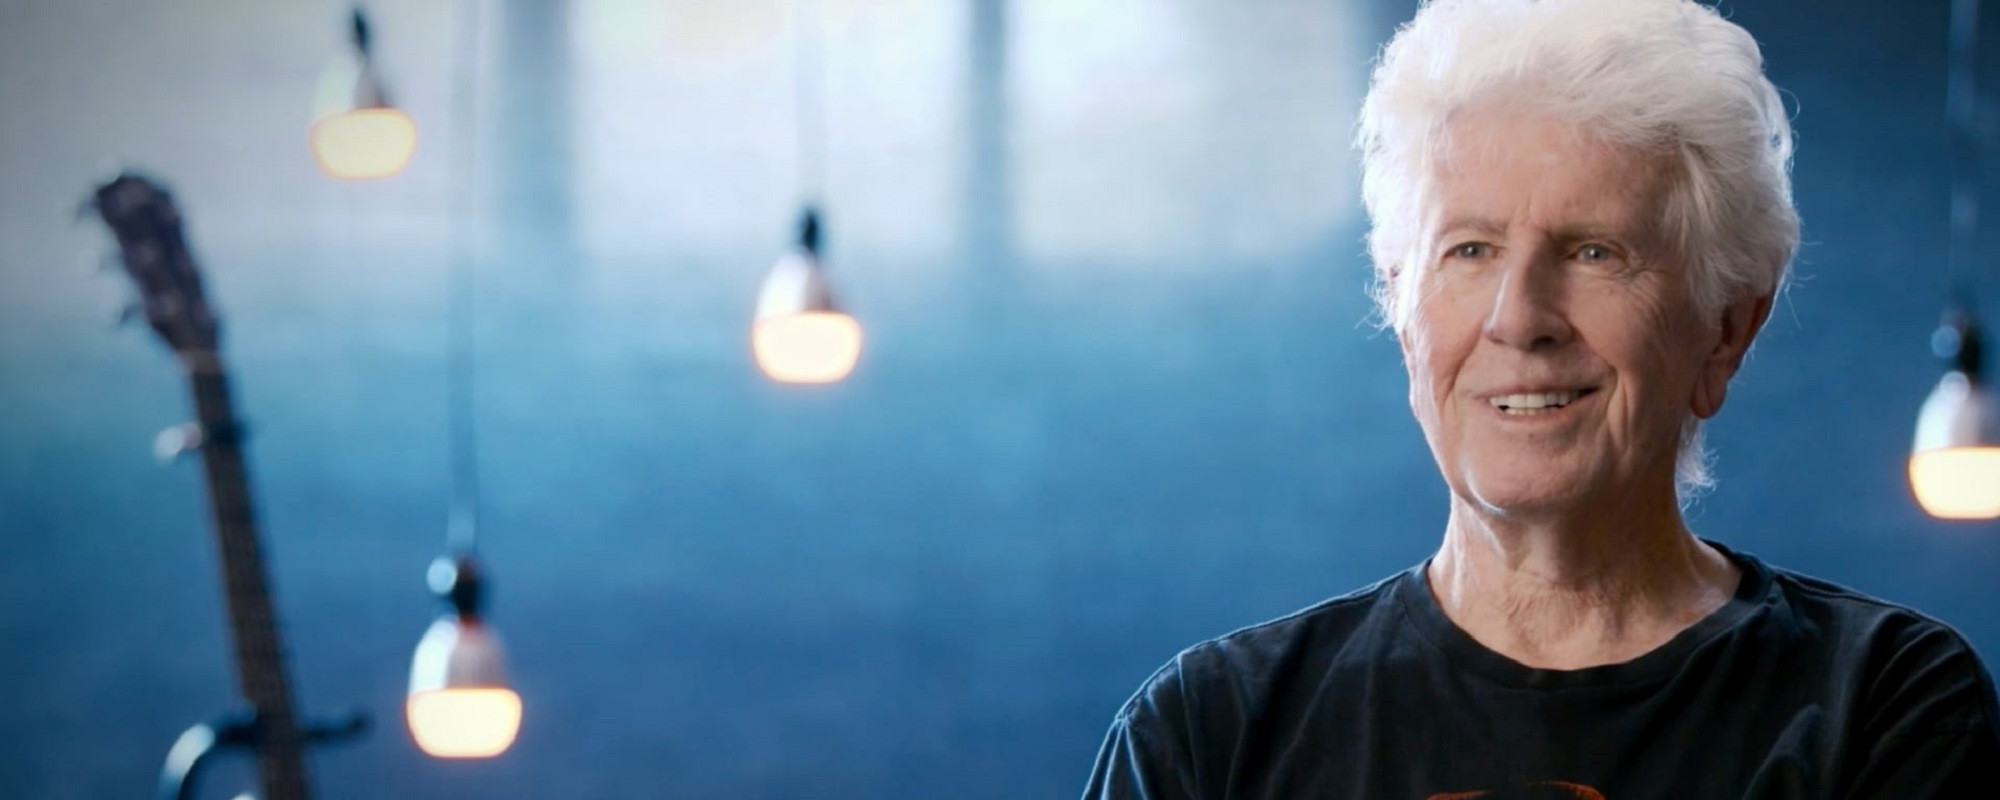 Graham Nash Promotes Making the World “A Better Place” in Video for Pass It On Campaign